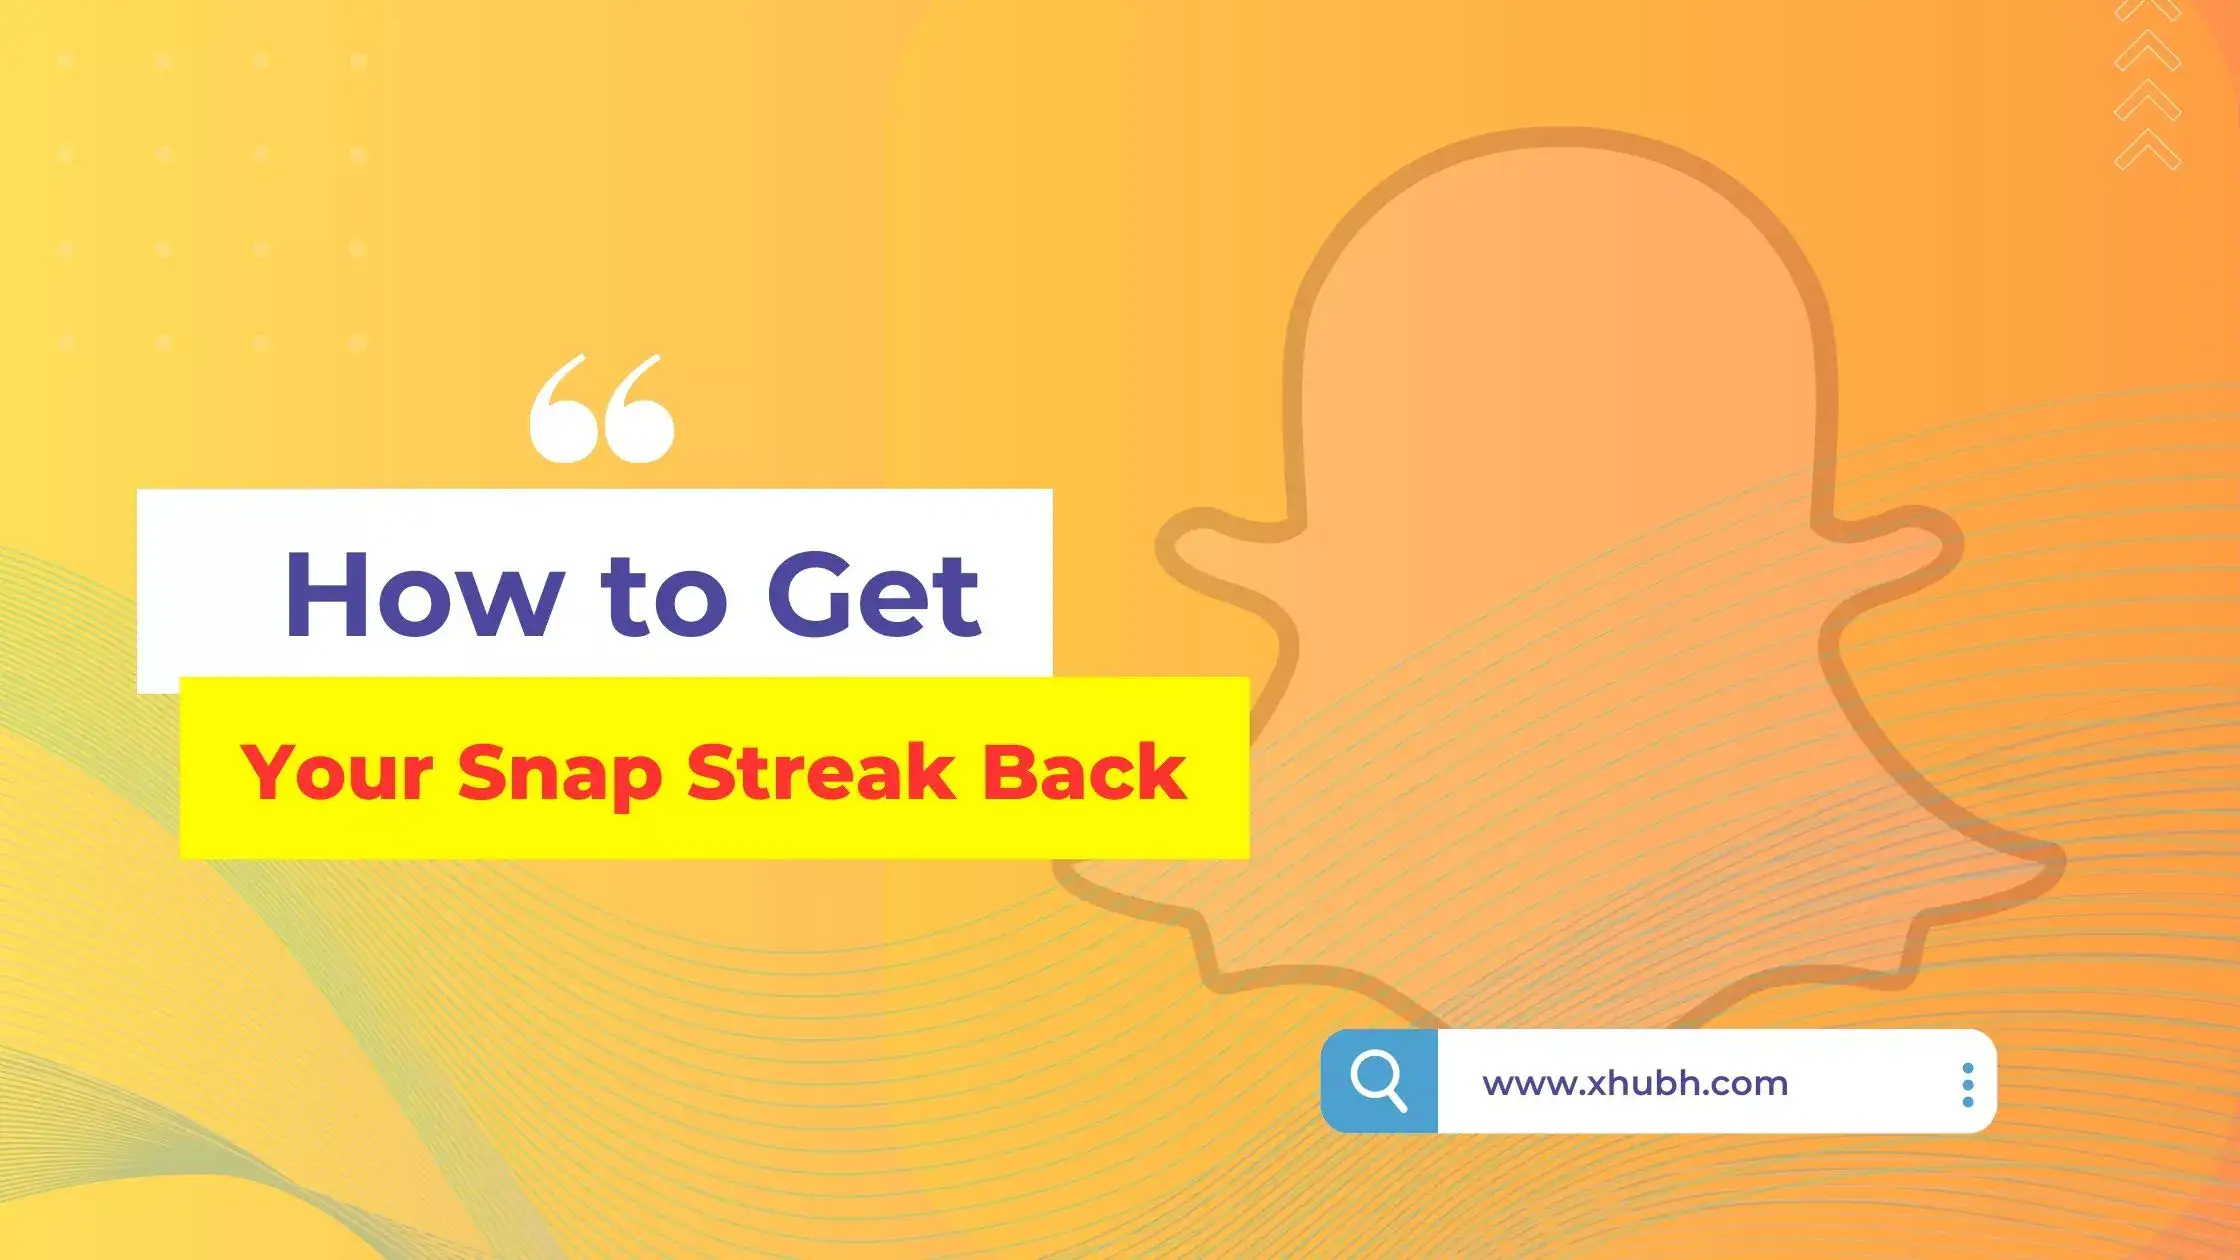 How to Get Your Snap Streak Back